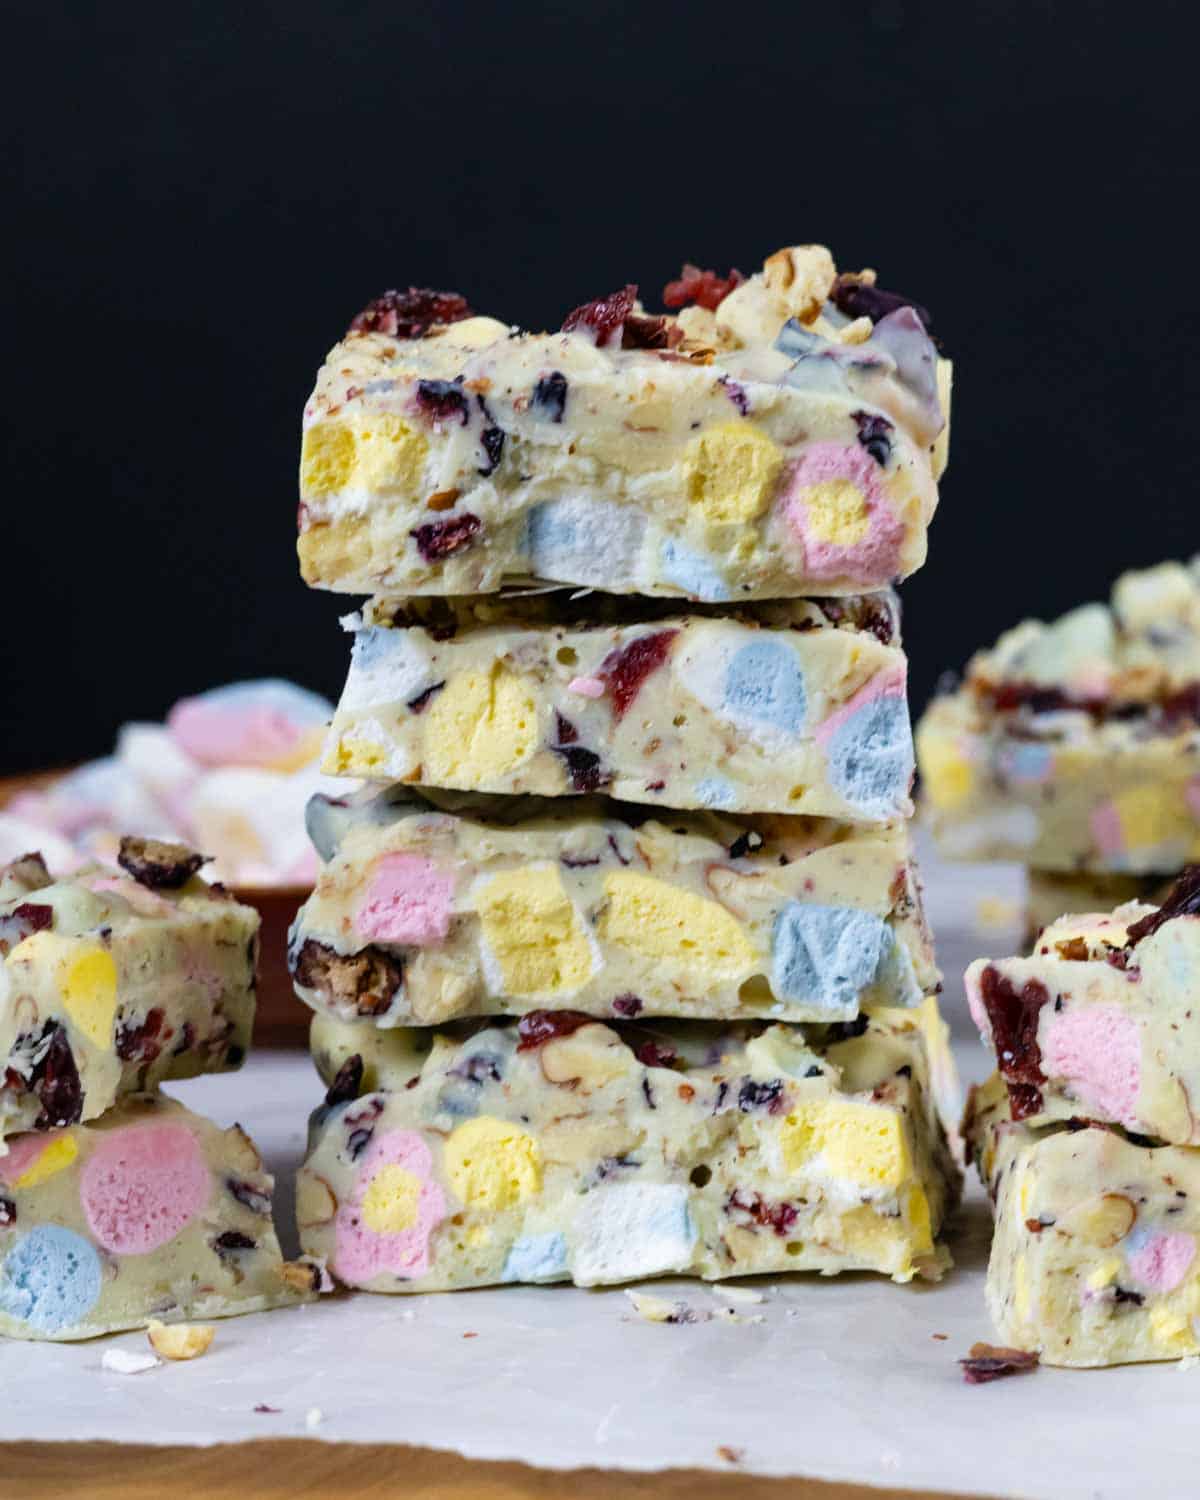 Stack of rocky road squares showing colorful marshmallows and toppings.